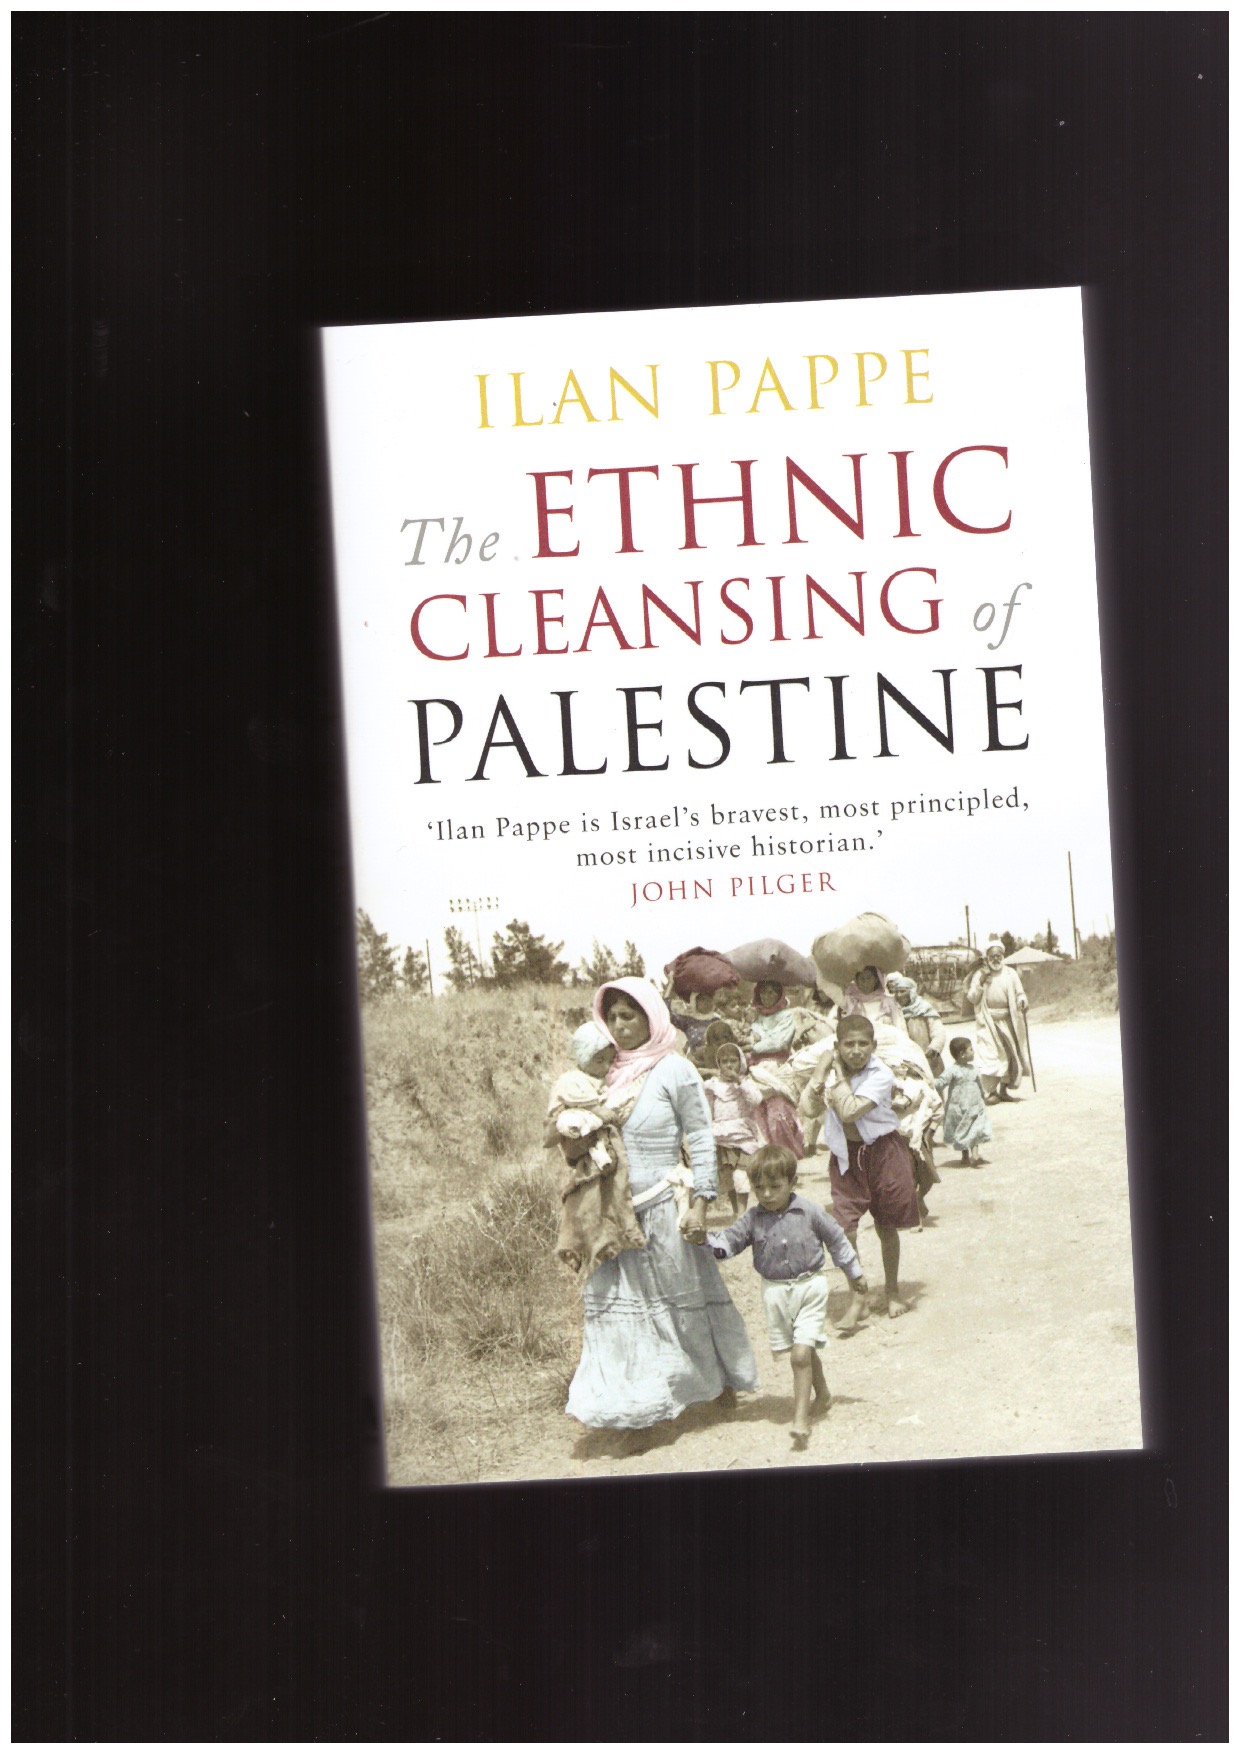 PAPPE, Ilian - The Ethnic Cleansing of Palestine